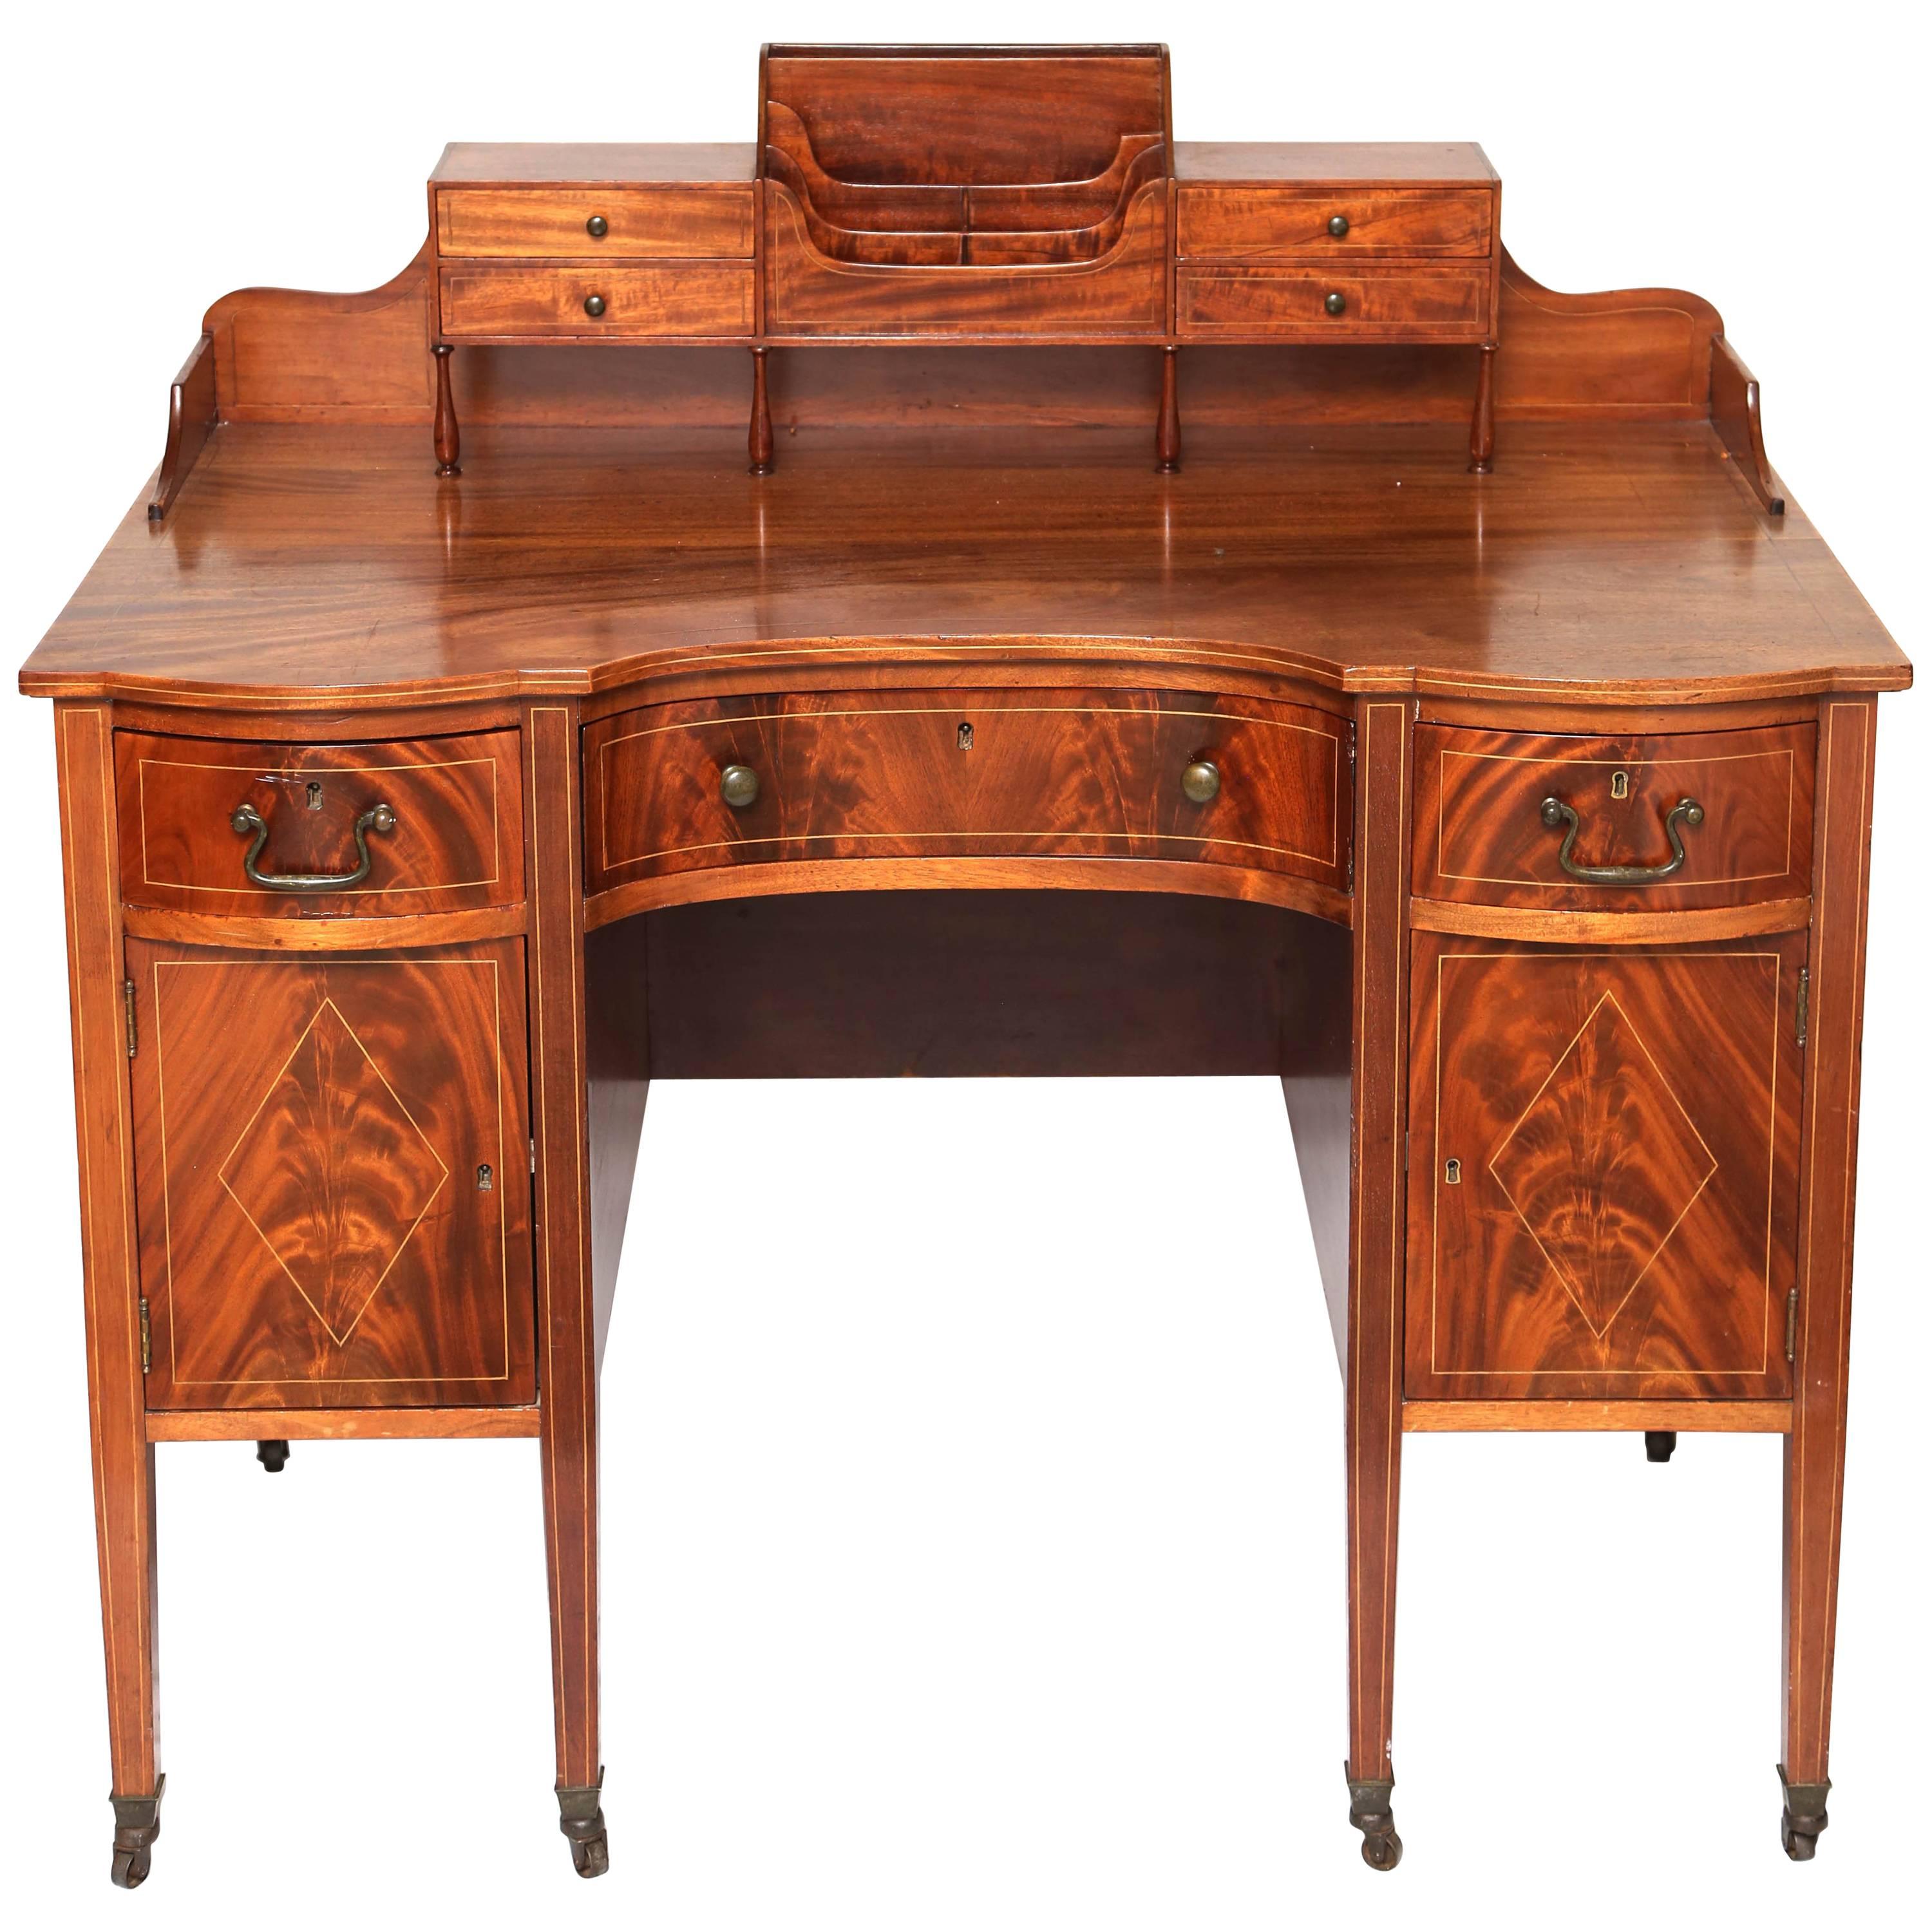 Superb Mahogany American Writing Desk with Leather Holder and Drawers